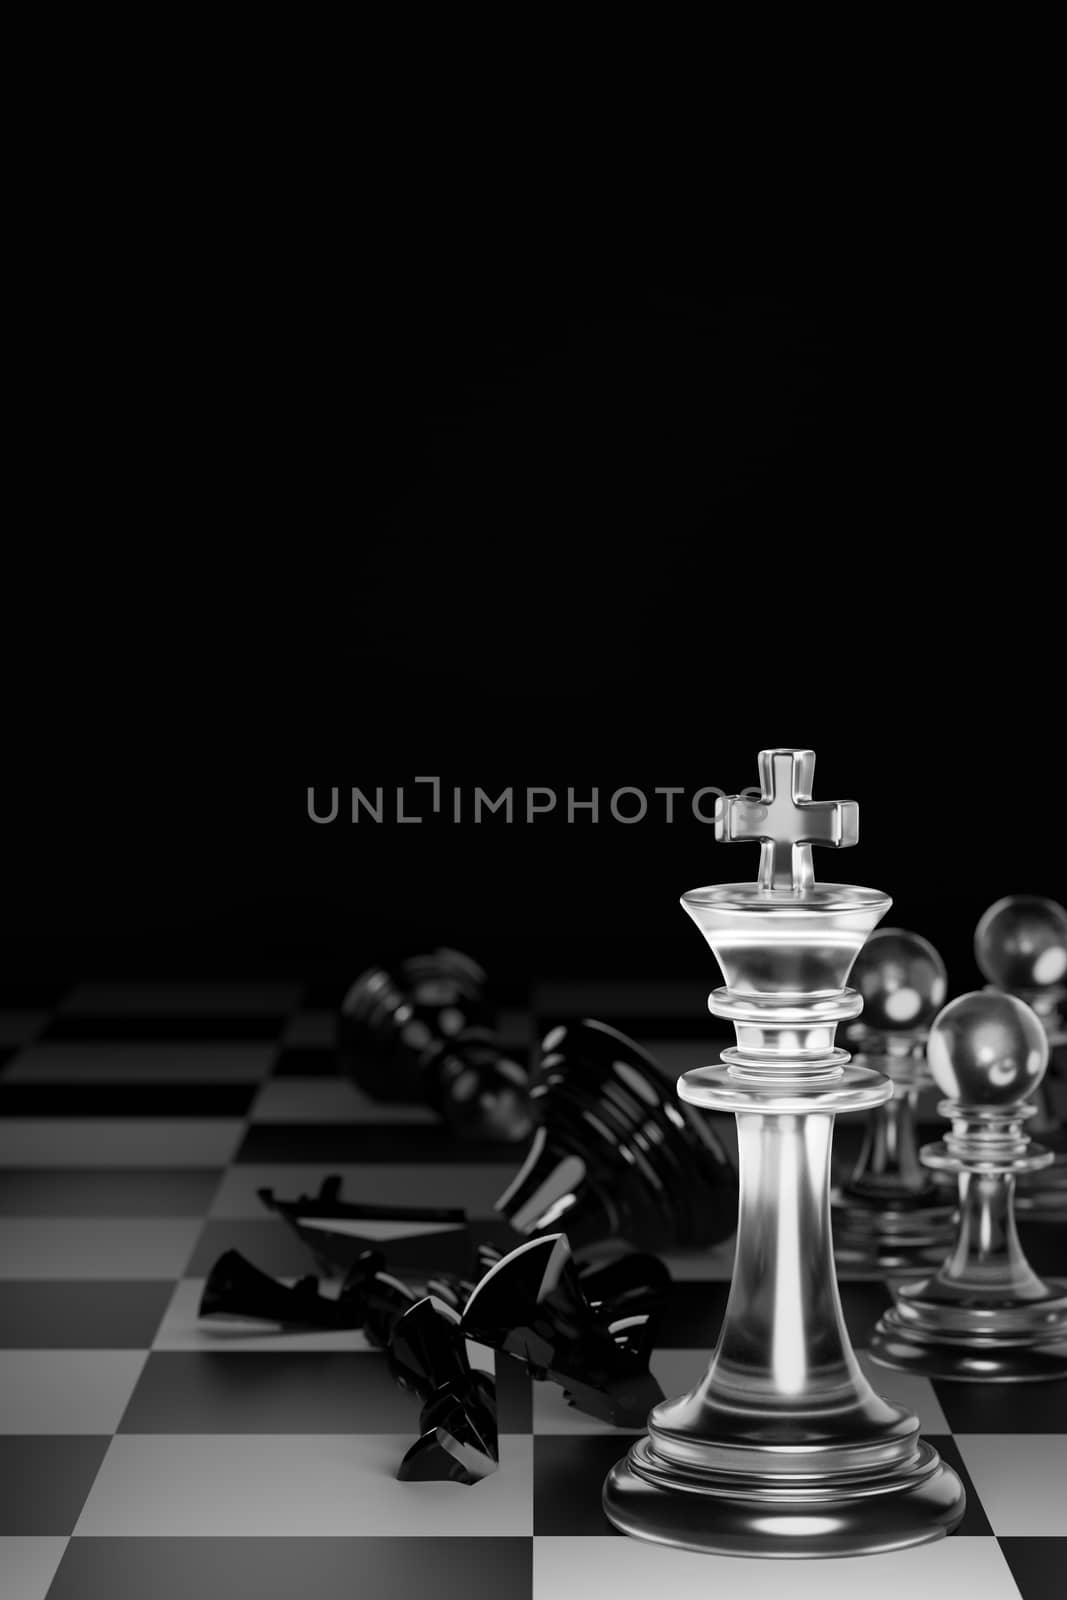 King of clear white chess has made checkmate king of black chess in dark black background. Concept of the strategic planning of leadership for victory in the competition of business games. 3D render.